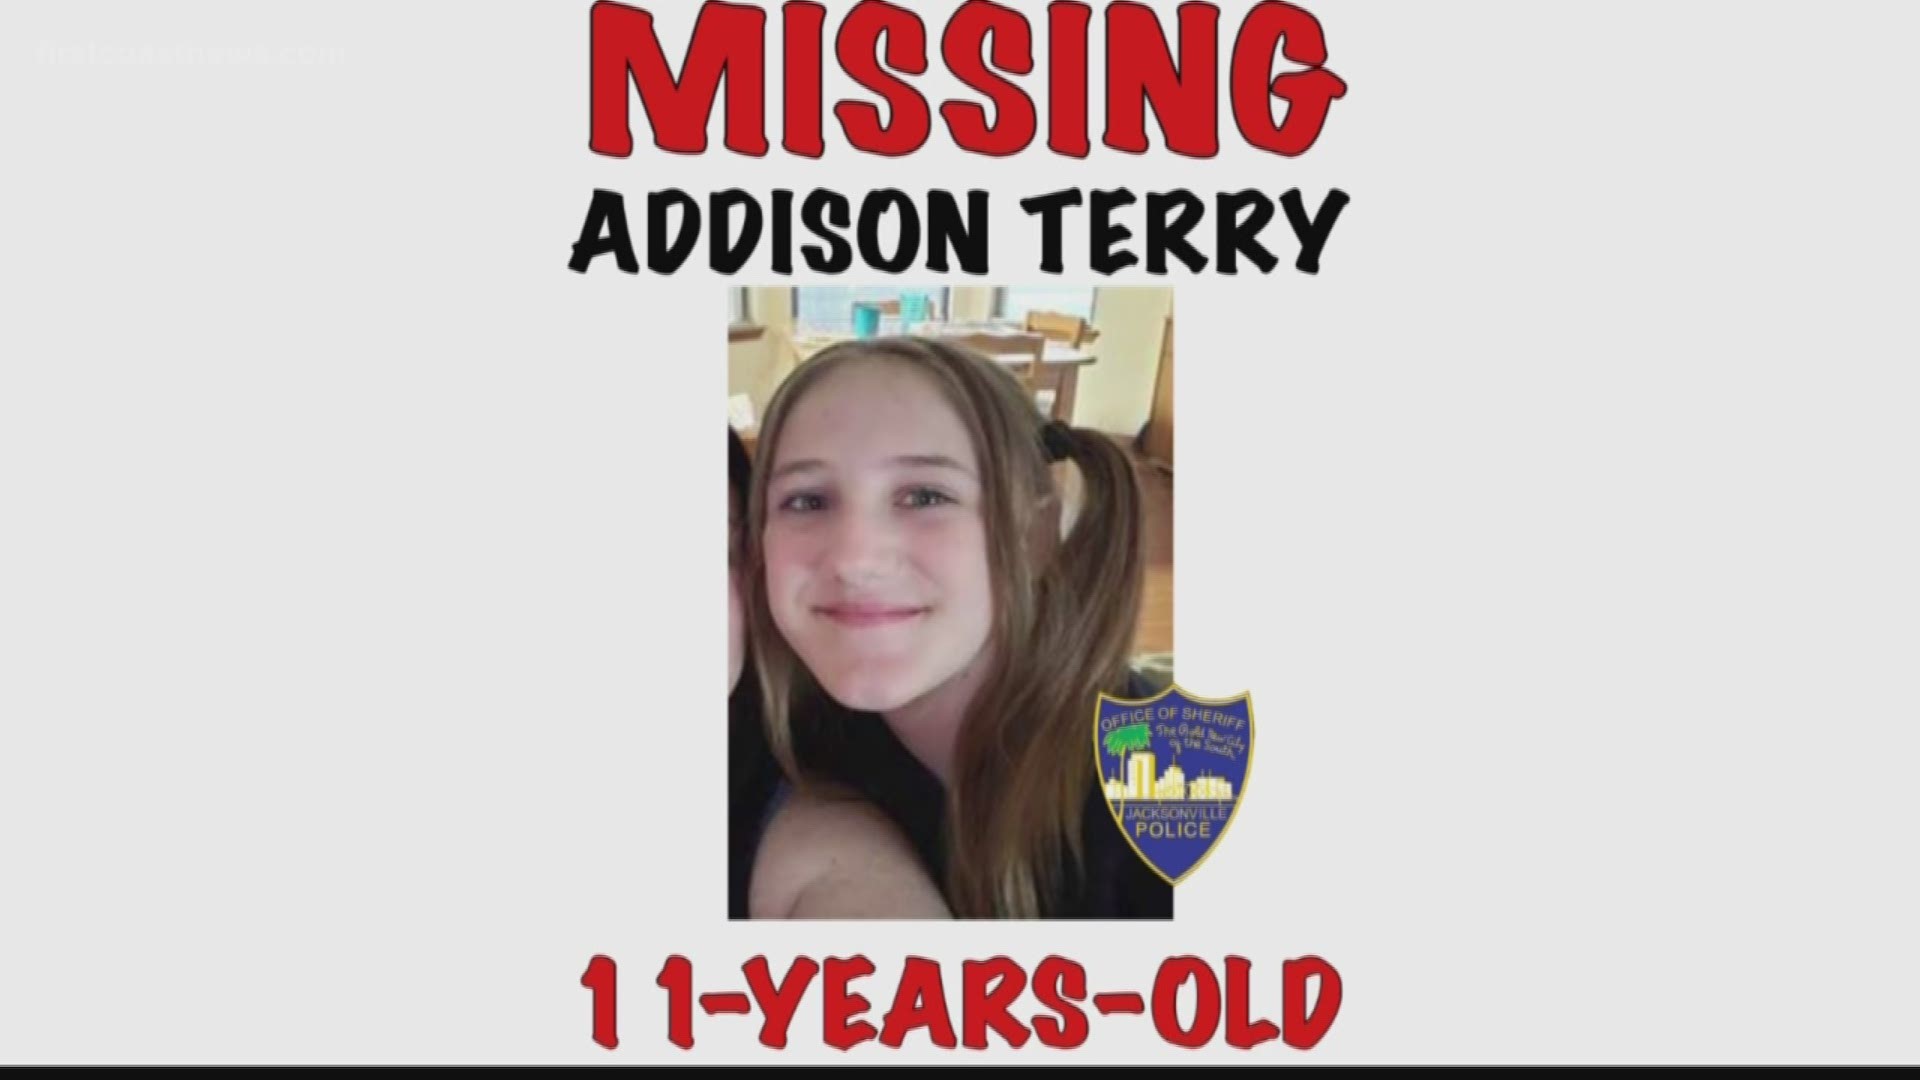 Police said that Addison Terry was last seen at the Youth Crisis Center Wednesday night around 10 p.m. She is 5 feet 2 inches, 107 pounds, has blue eyes and brown hair and was last seen wearing a blue shirt and unknown colored pants.